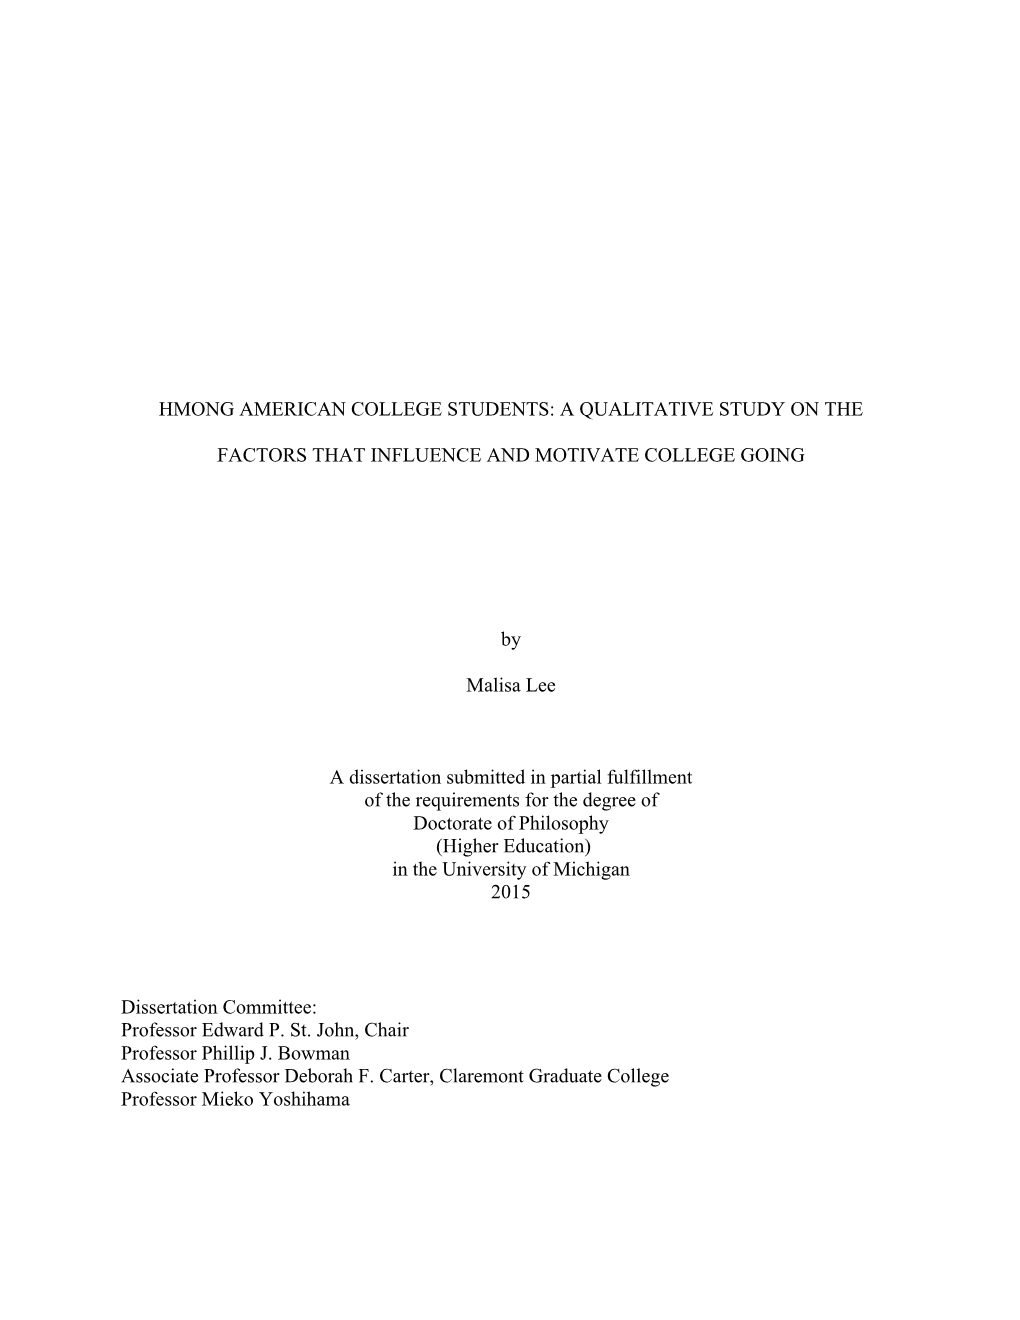 Hmong American College Students: a Qualitative Study on The